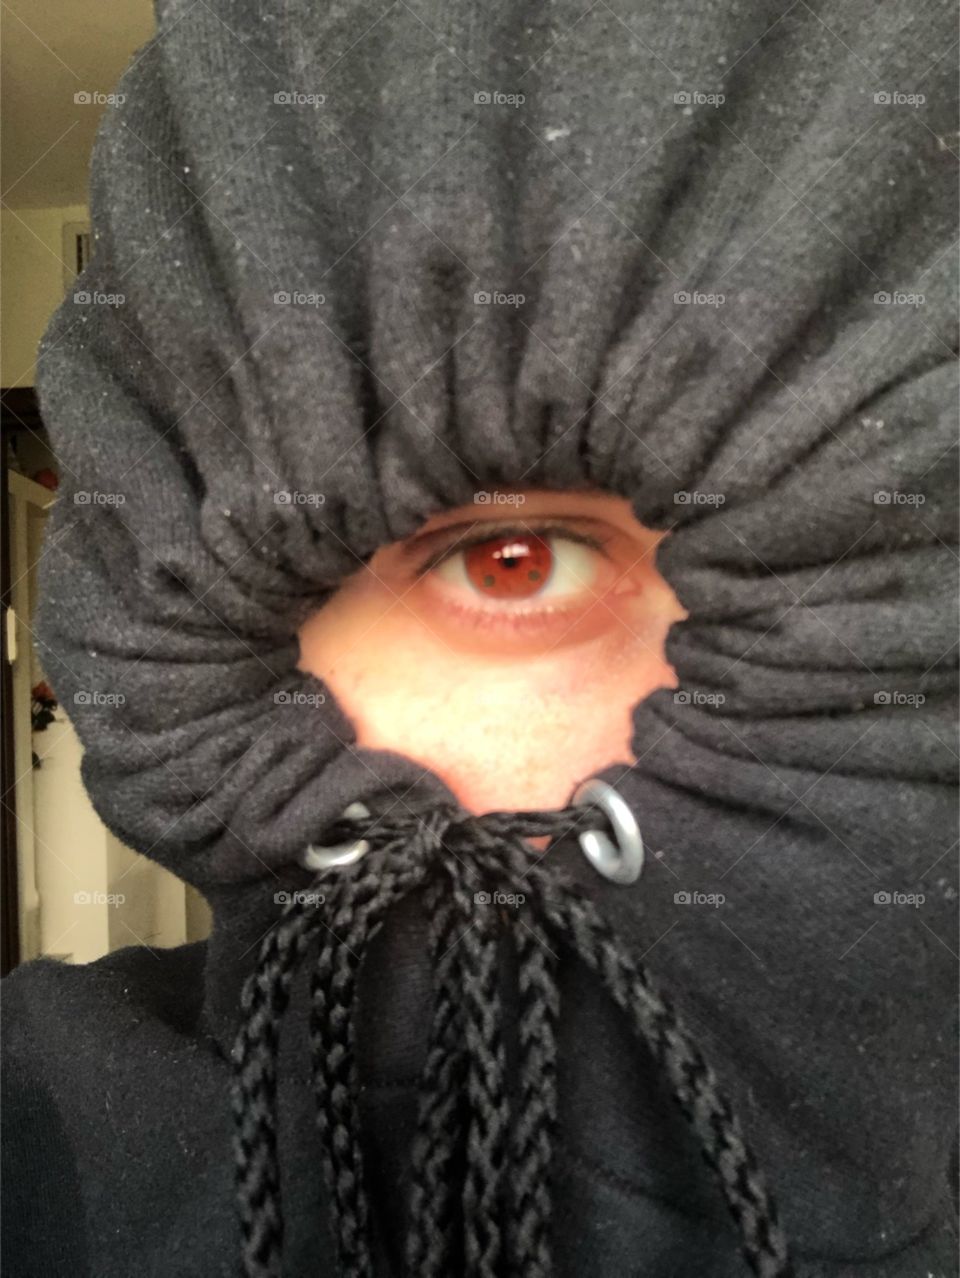 Me as Obito Uchiha, with a low budget cosplay 